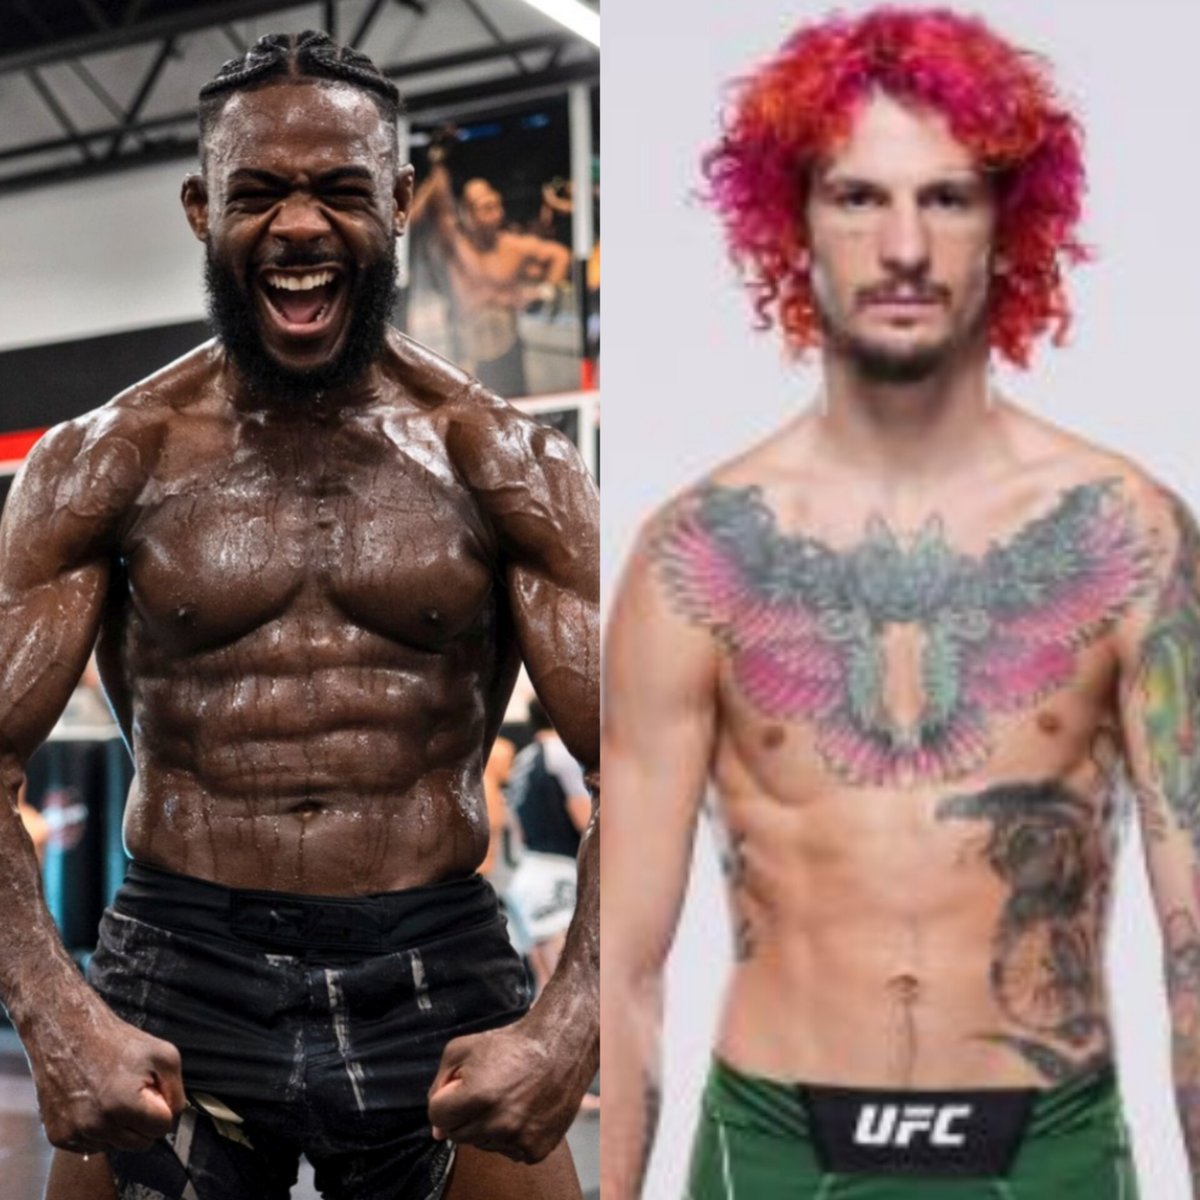 It's hard to convince those who don't watch MMA that the guy who looks like 69 smoked the guy who built like a monster. #UFC292